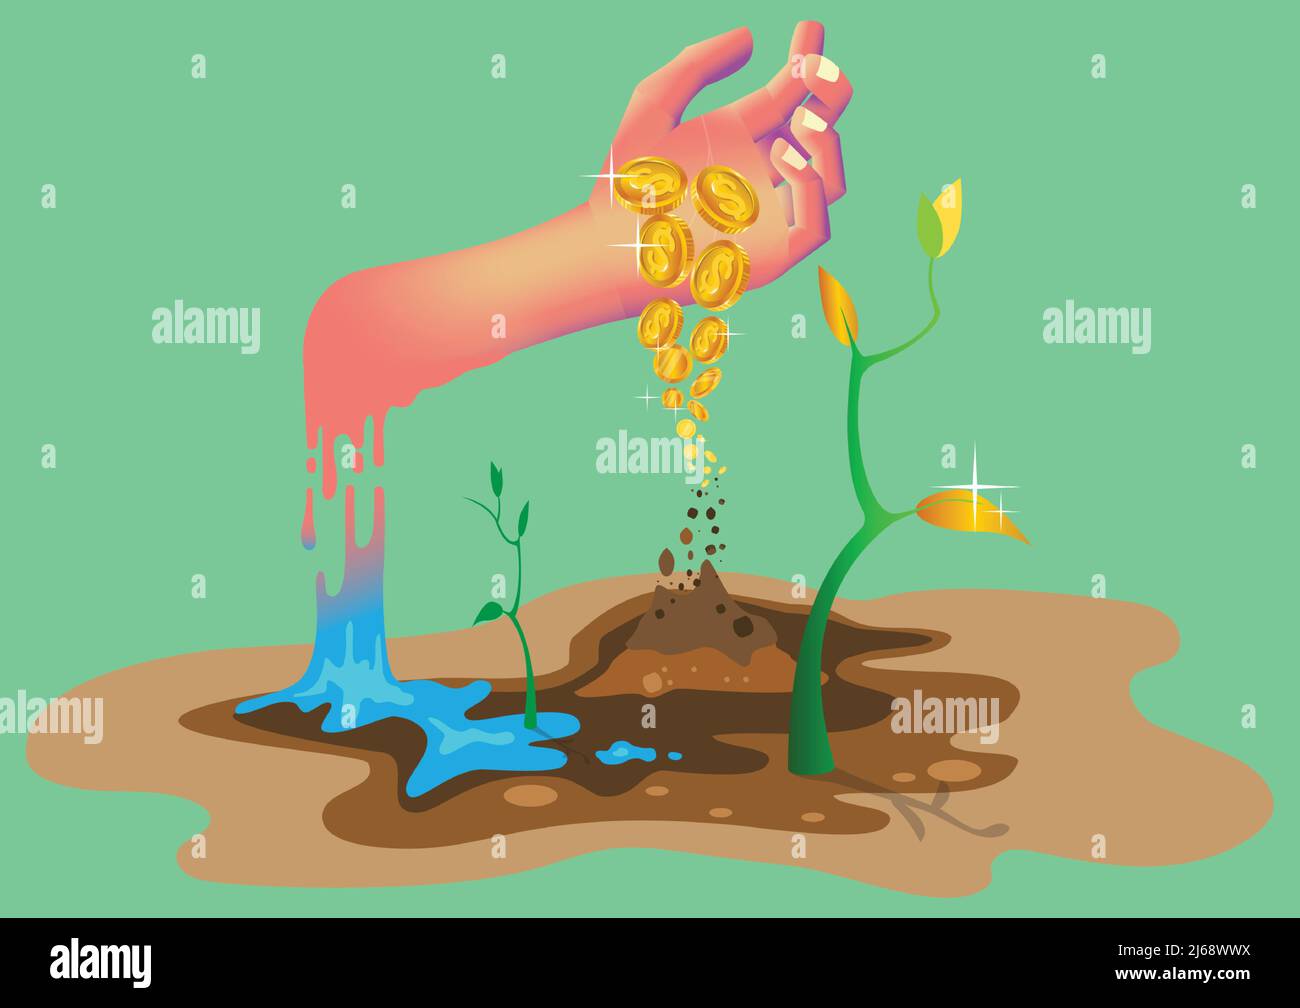 Saving money concept. Hand drop soin into money on plants. Plants are germination growing. Skin dissolves into water. Stock Vector